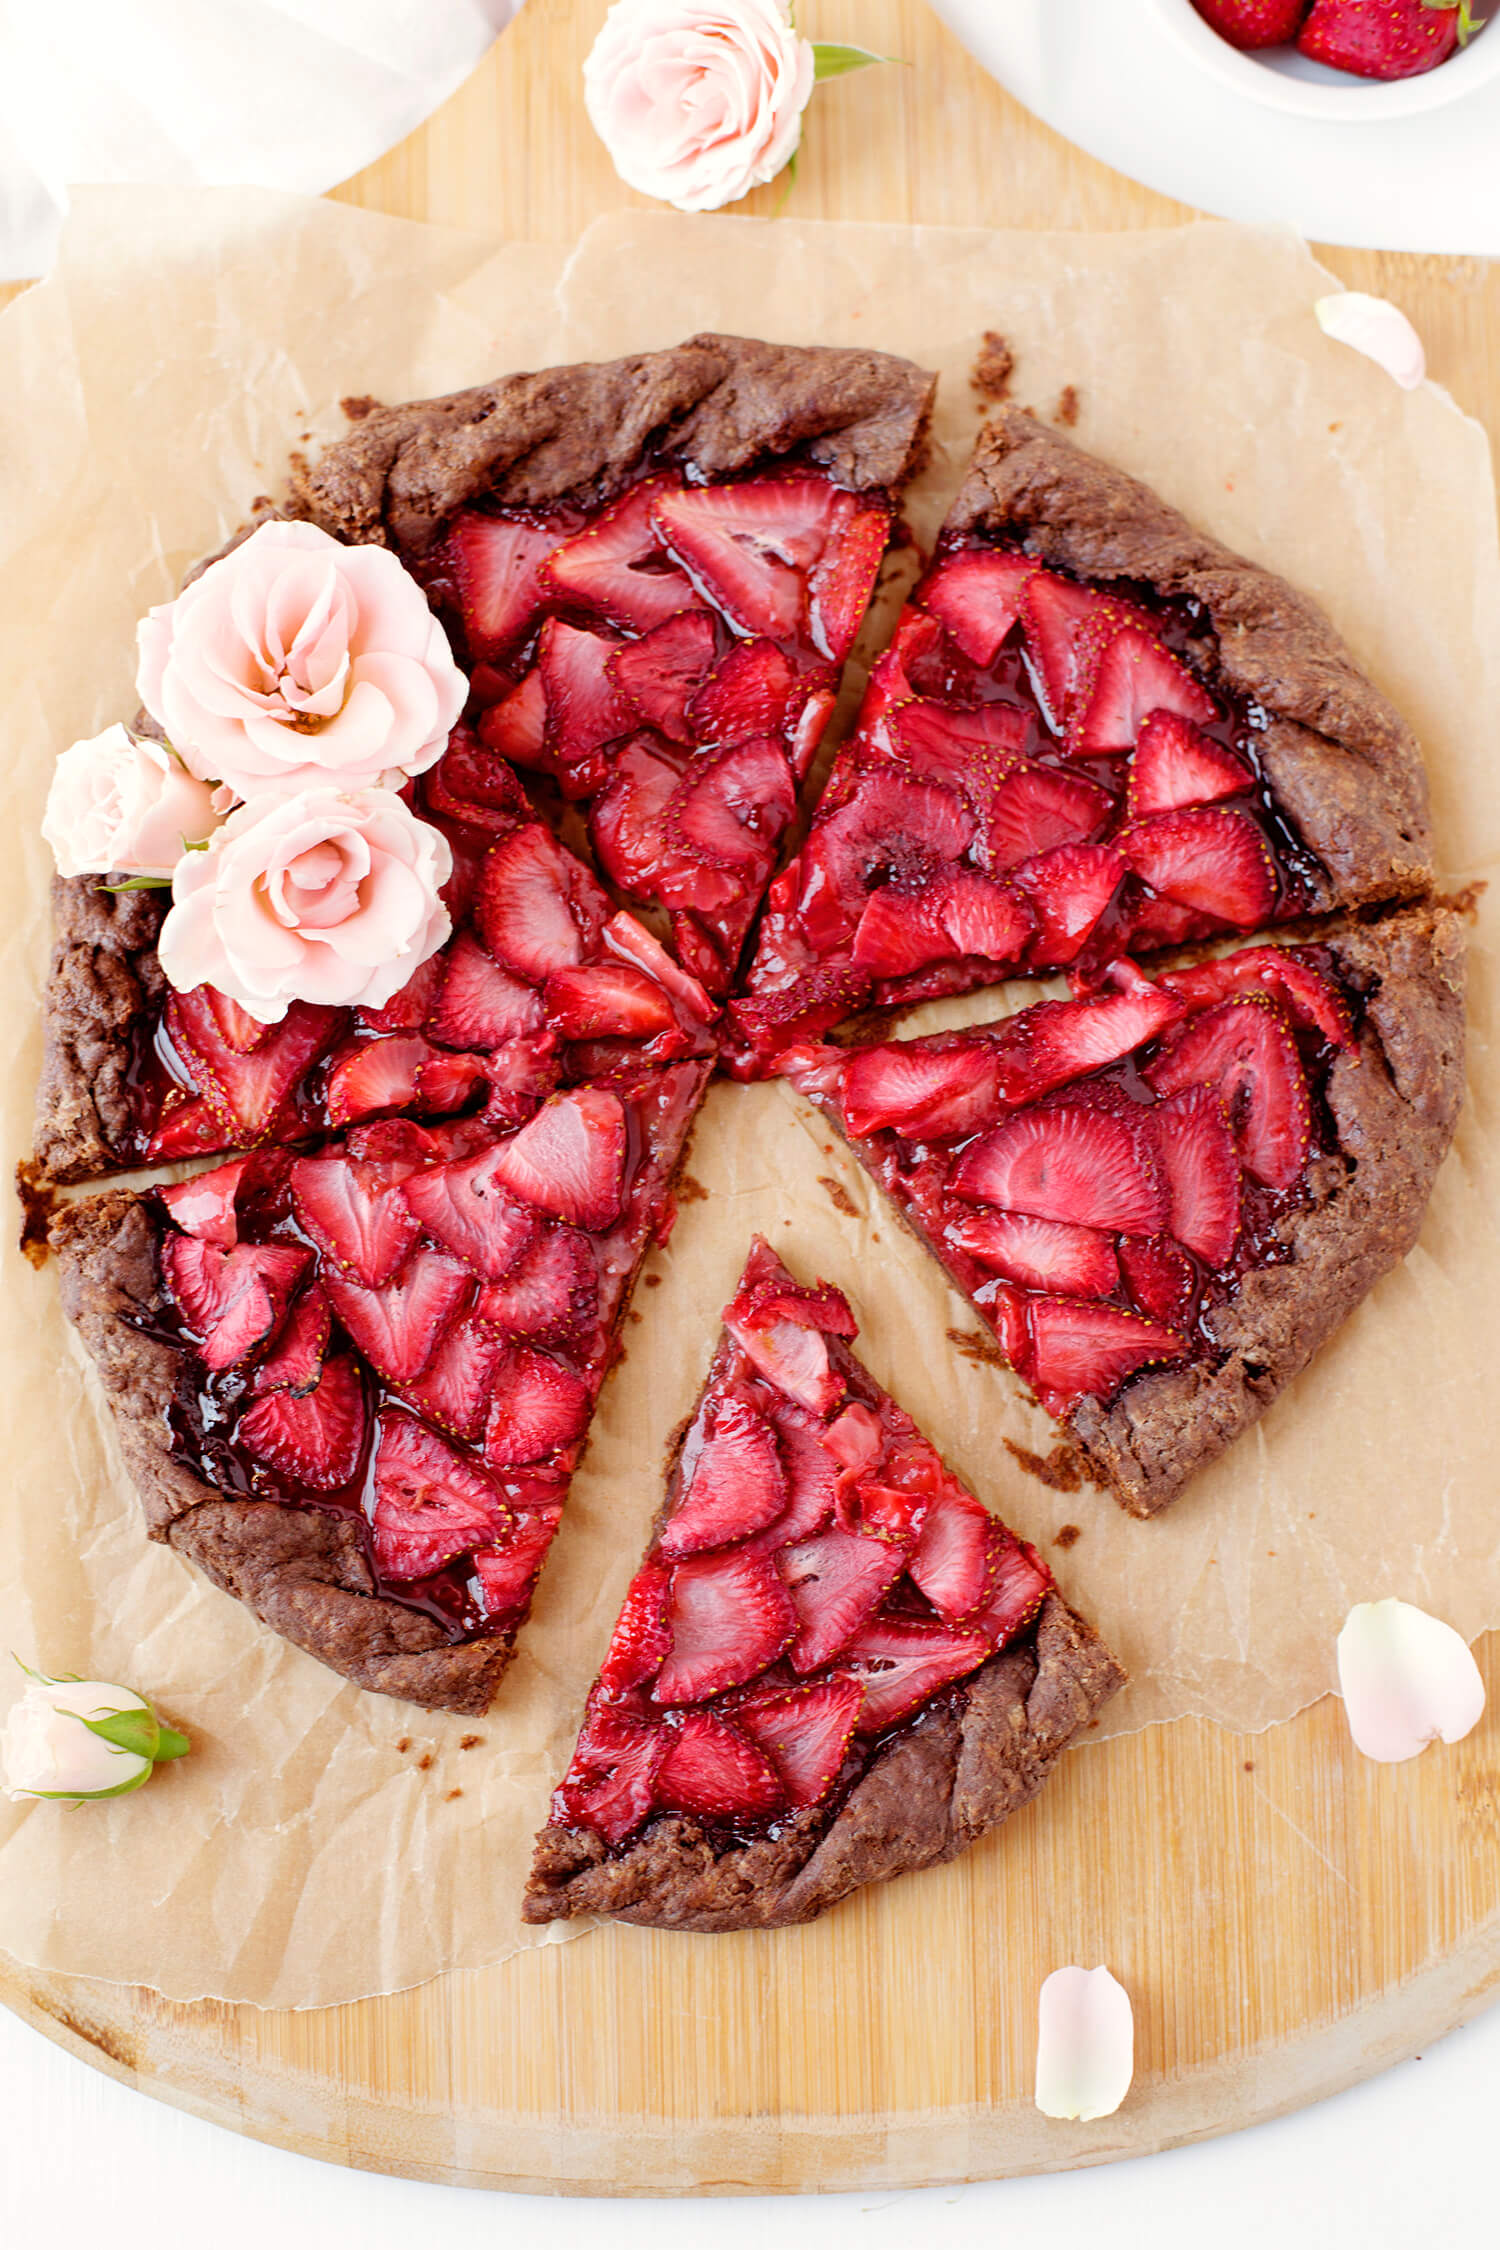 Strawberries and champagne galette with a chocolate crust (via abeautifulmess.com) 